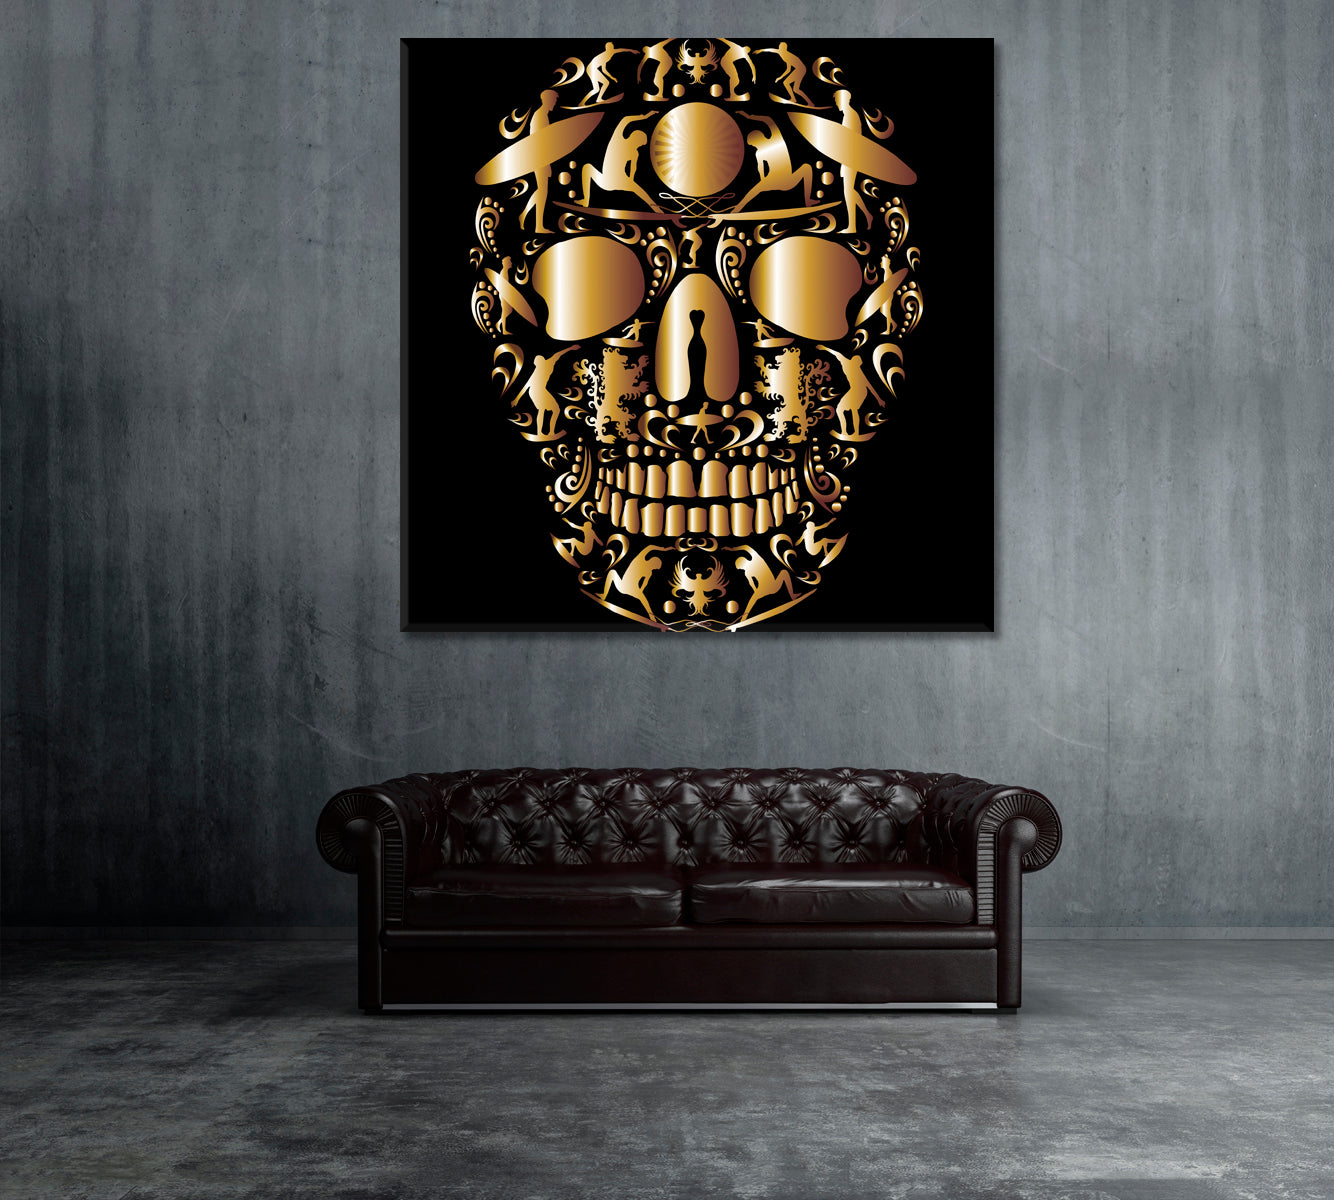 Golden Skull with Surfers Canvas Print ArtLexy 1 Panel 12"x12" inches 